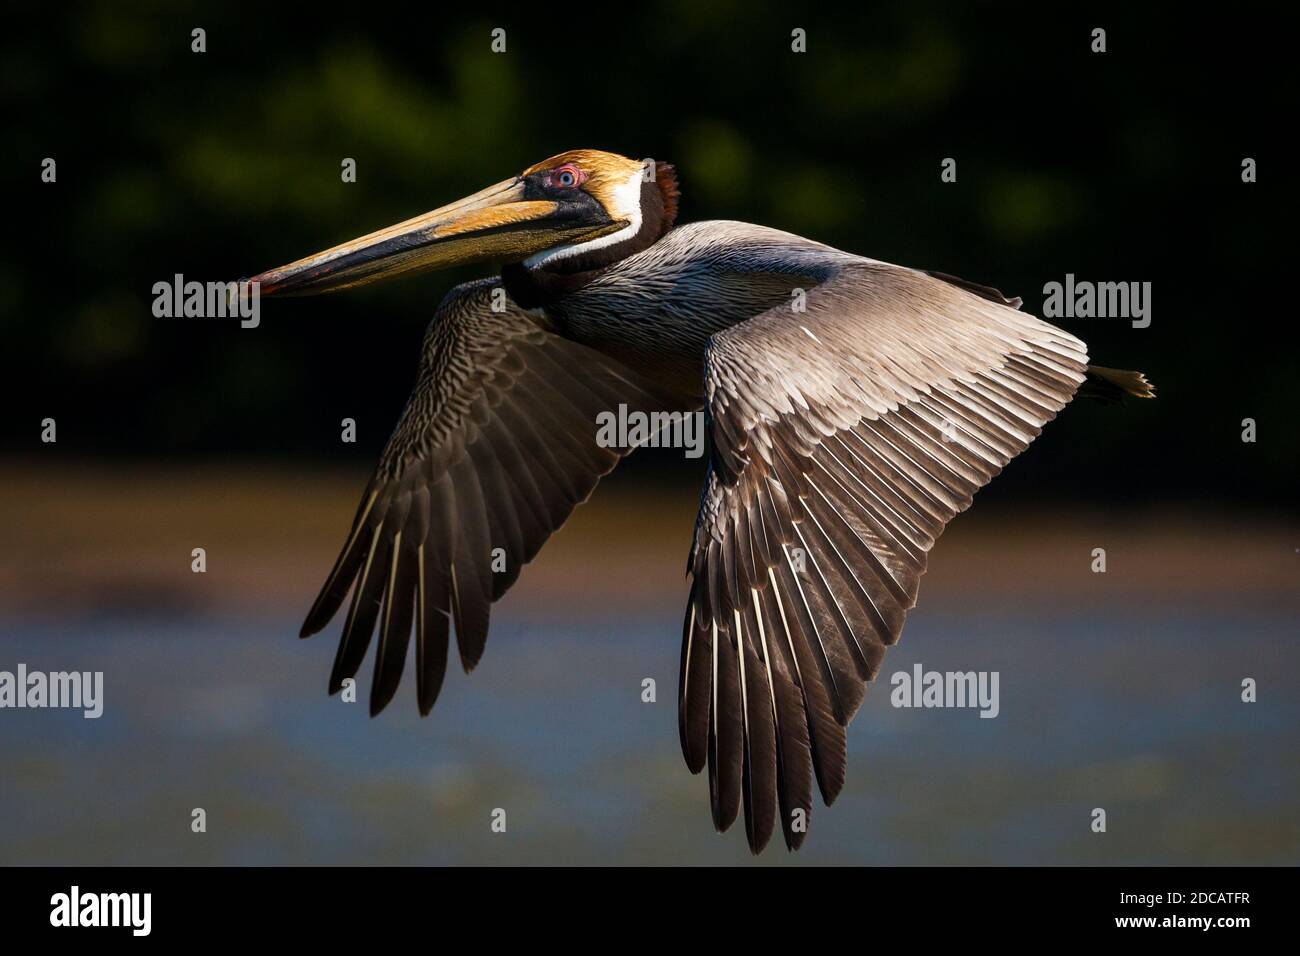 Brown Pelican, Pelecanus occidentalis, at the outlet of Rio Grande, Pacific coast, Cocle province, Republic of Panama. Stock Photo